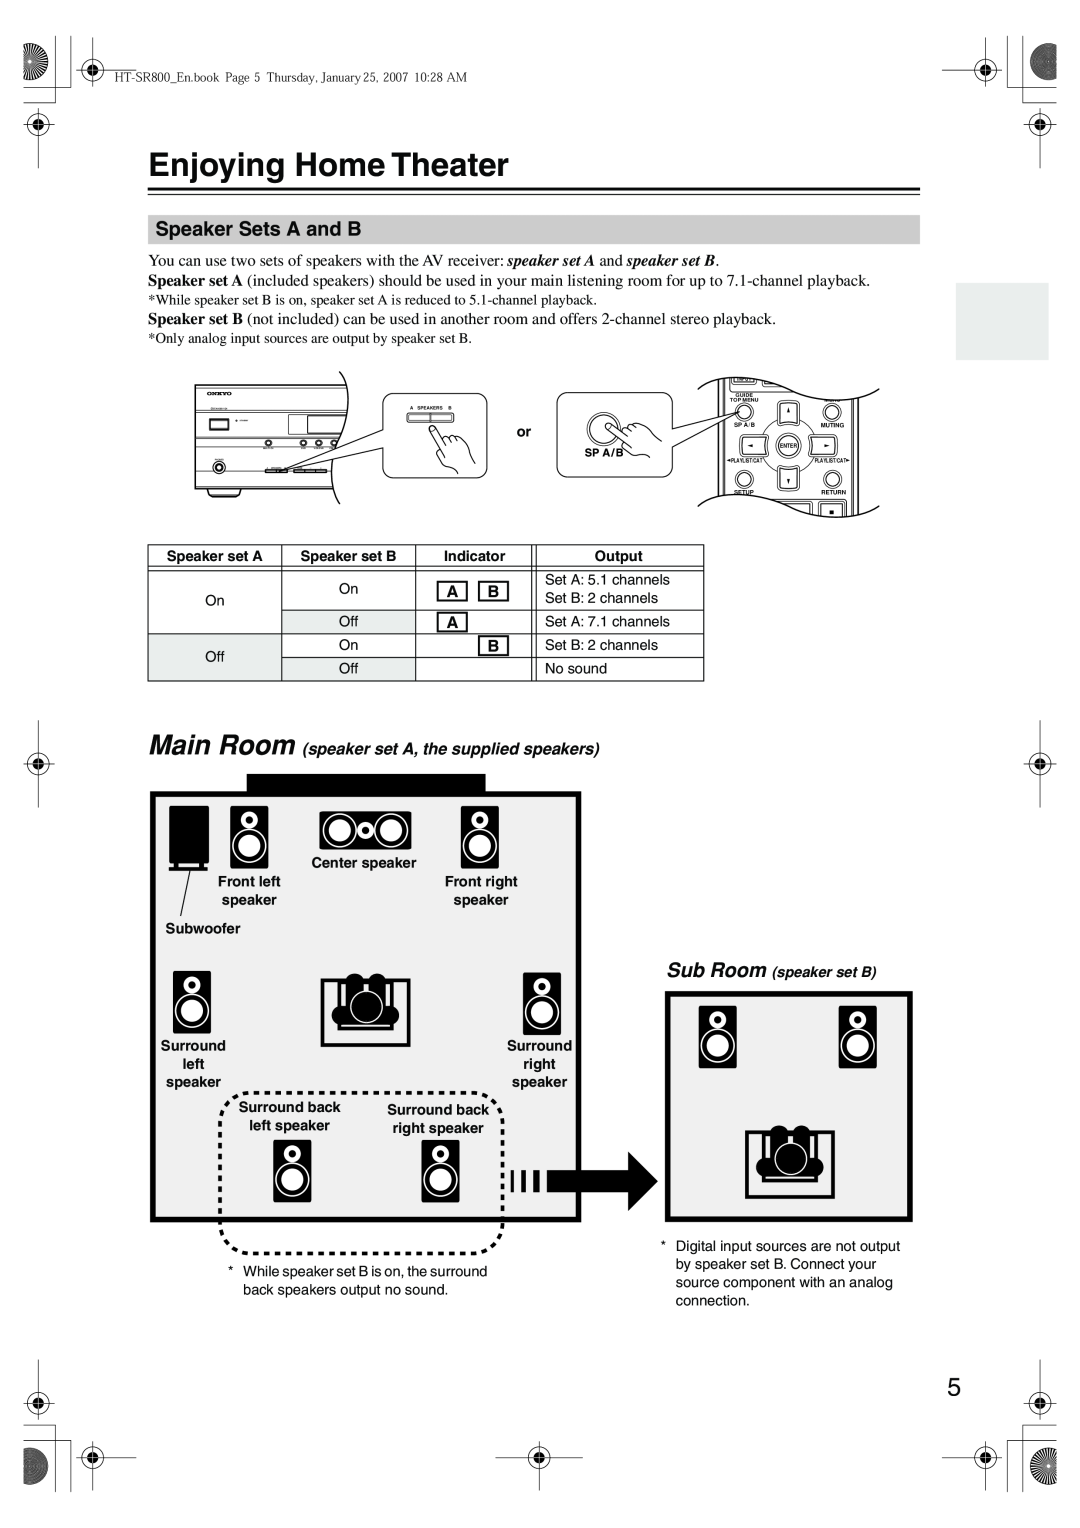 Onkyo HT-SR800 instruction manual Enjoying Home Theater, Speaker Sets A and B 